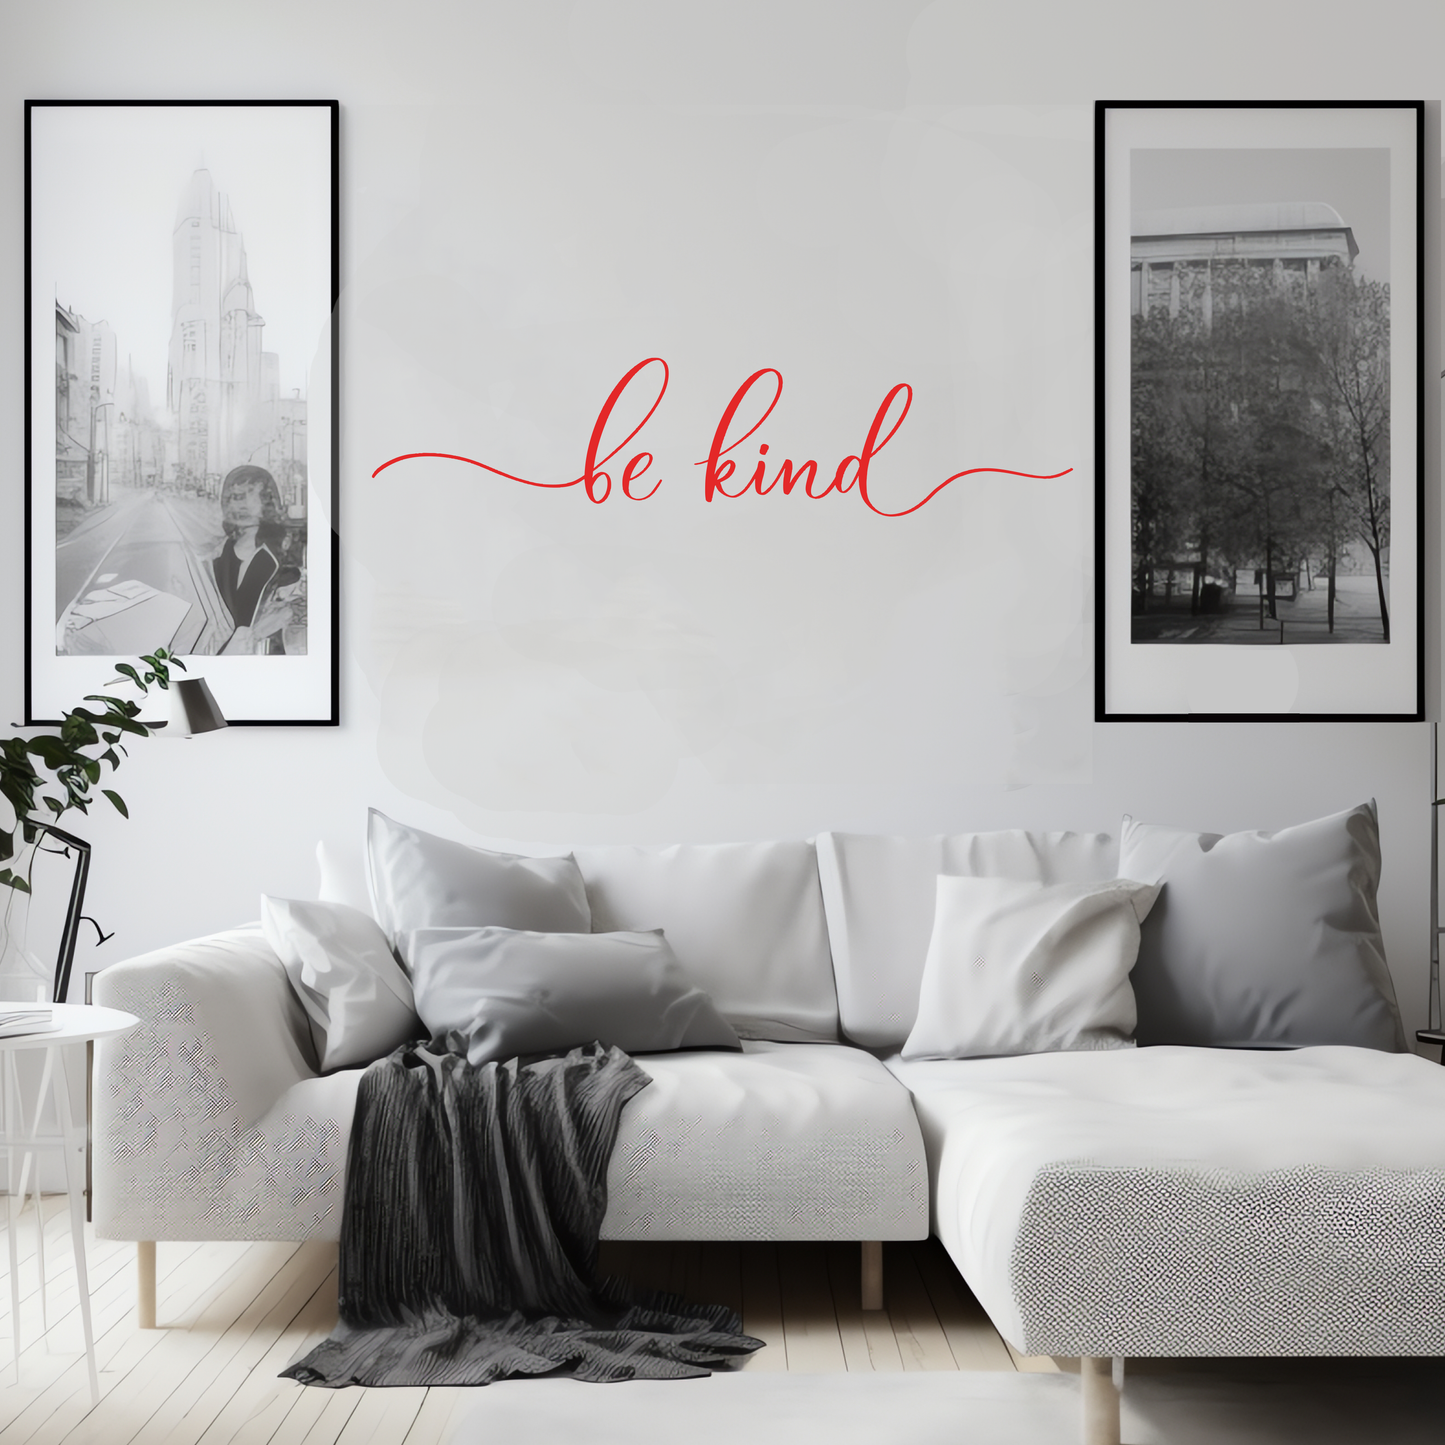 Be Kind Wall Sticker Decal